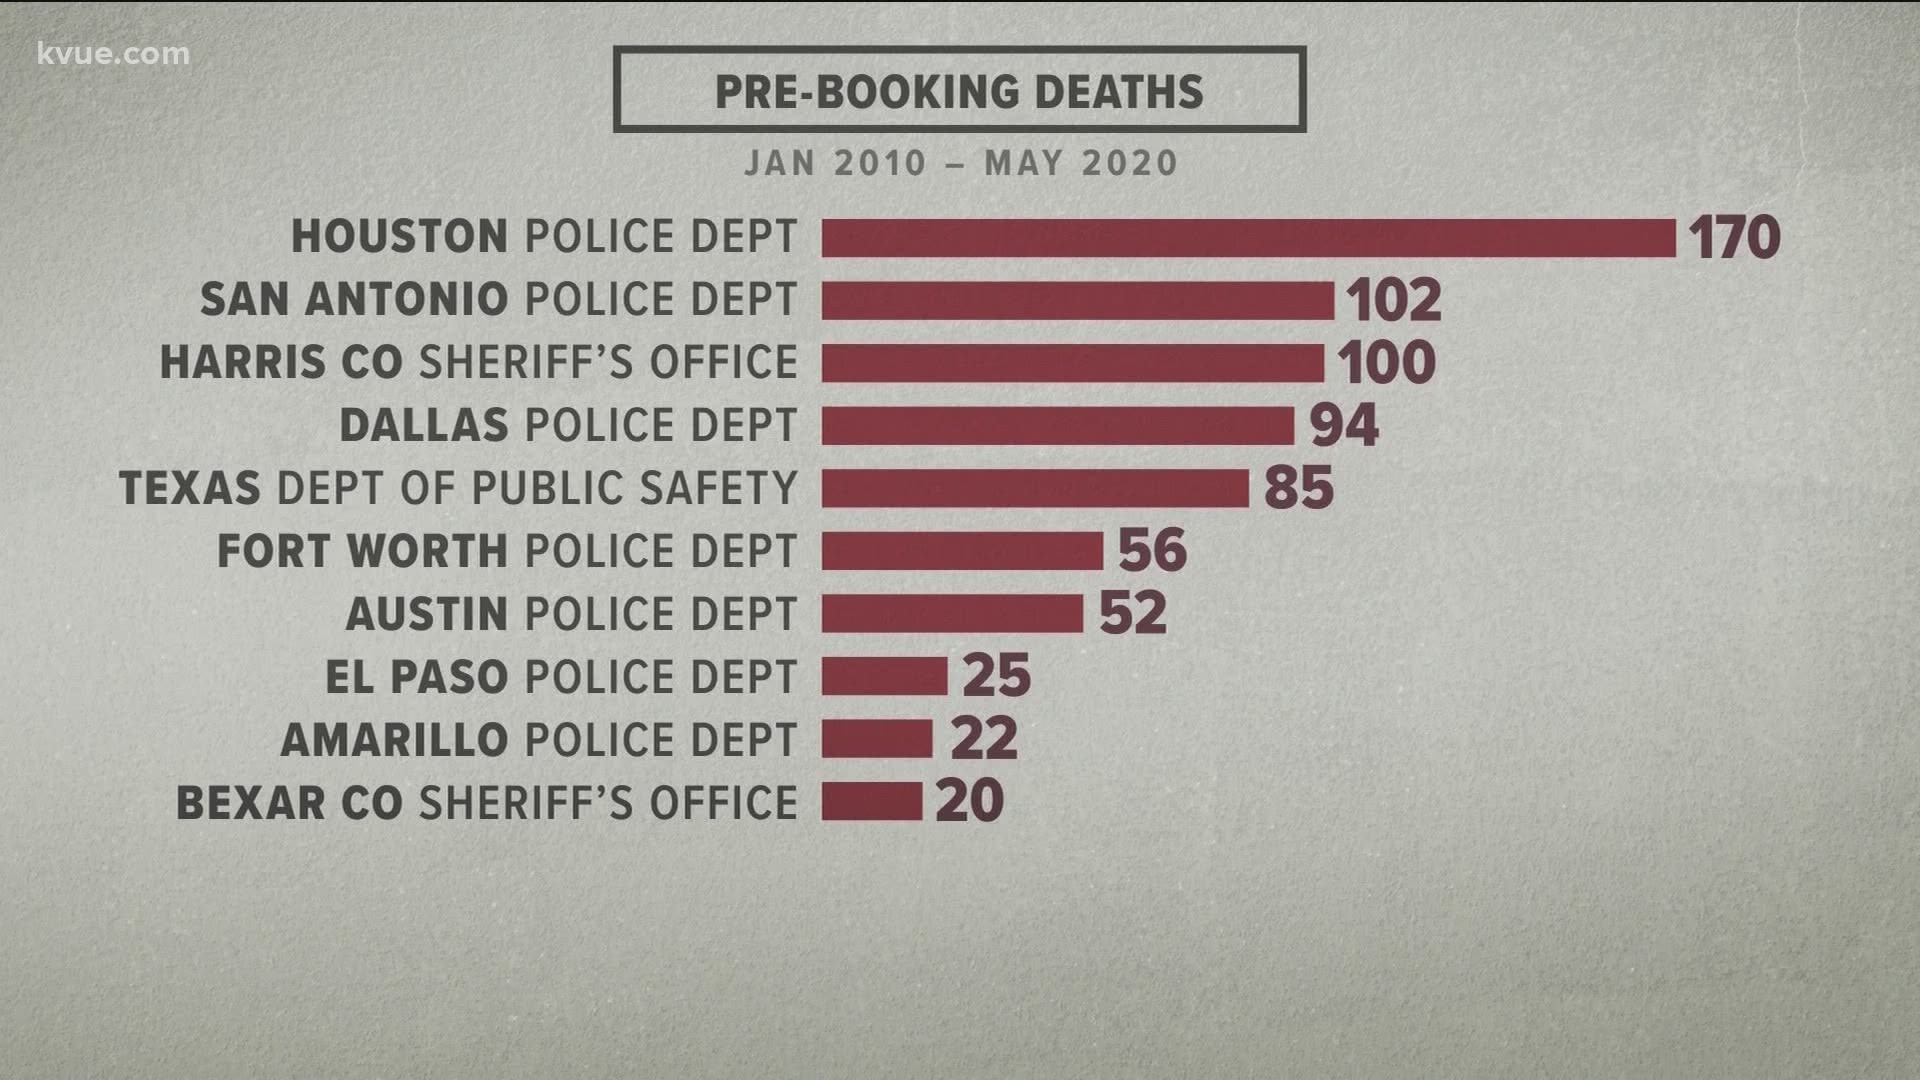 The KVUE Defenders reveal how often suspects die in police custody in Texas while under restraint. Brad Streicher breaks down the data.